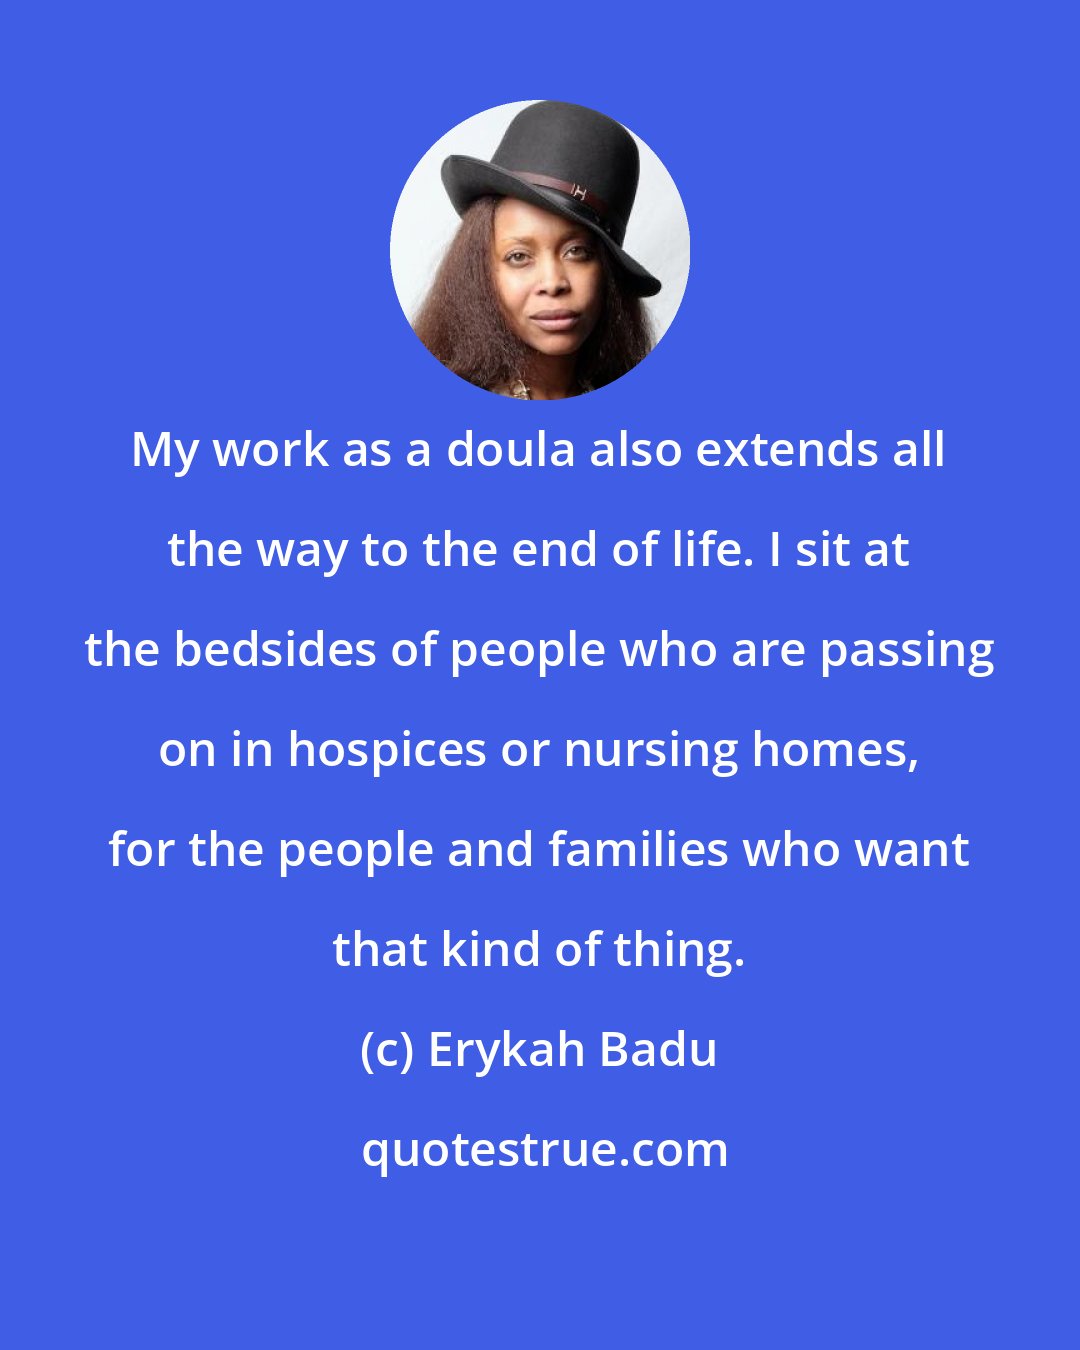 Erykah Badu: My work as a doula also extends all the way to the end of life. I sit at the bedsides of people who are passing on in hospices or nursing homes, for the people and families who want that kind of thing.